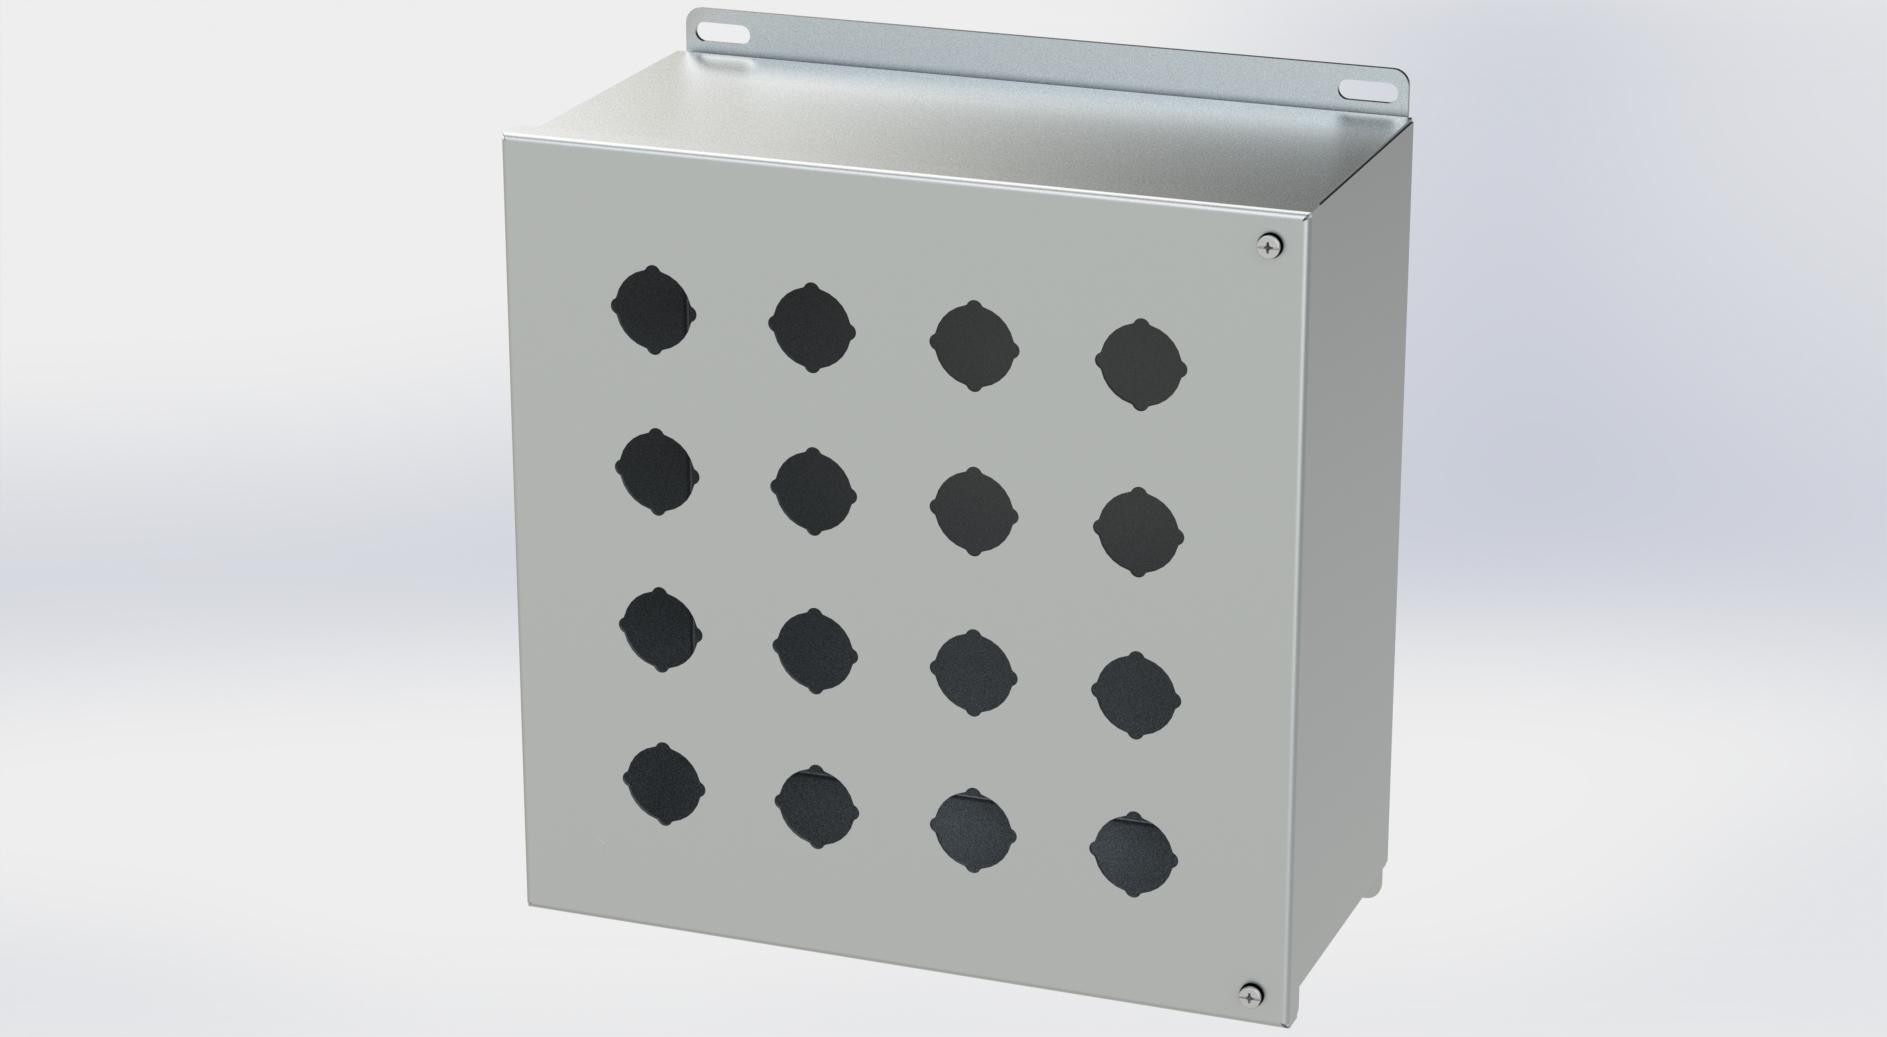 Saginaw Control SCE-16PBHSS S.S. PB Enclosure, Height:12.13", Width:12.00", Depth:6.00", #4 brushed finish on all exterior surfaces. Optional sub-panels are powder coated white.